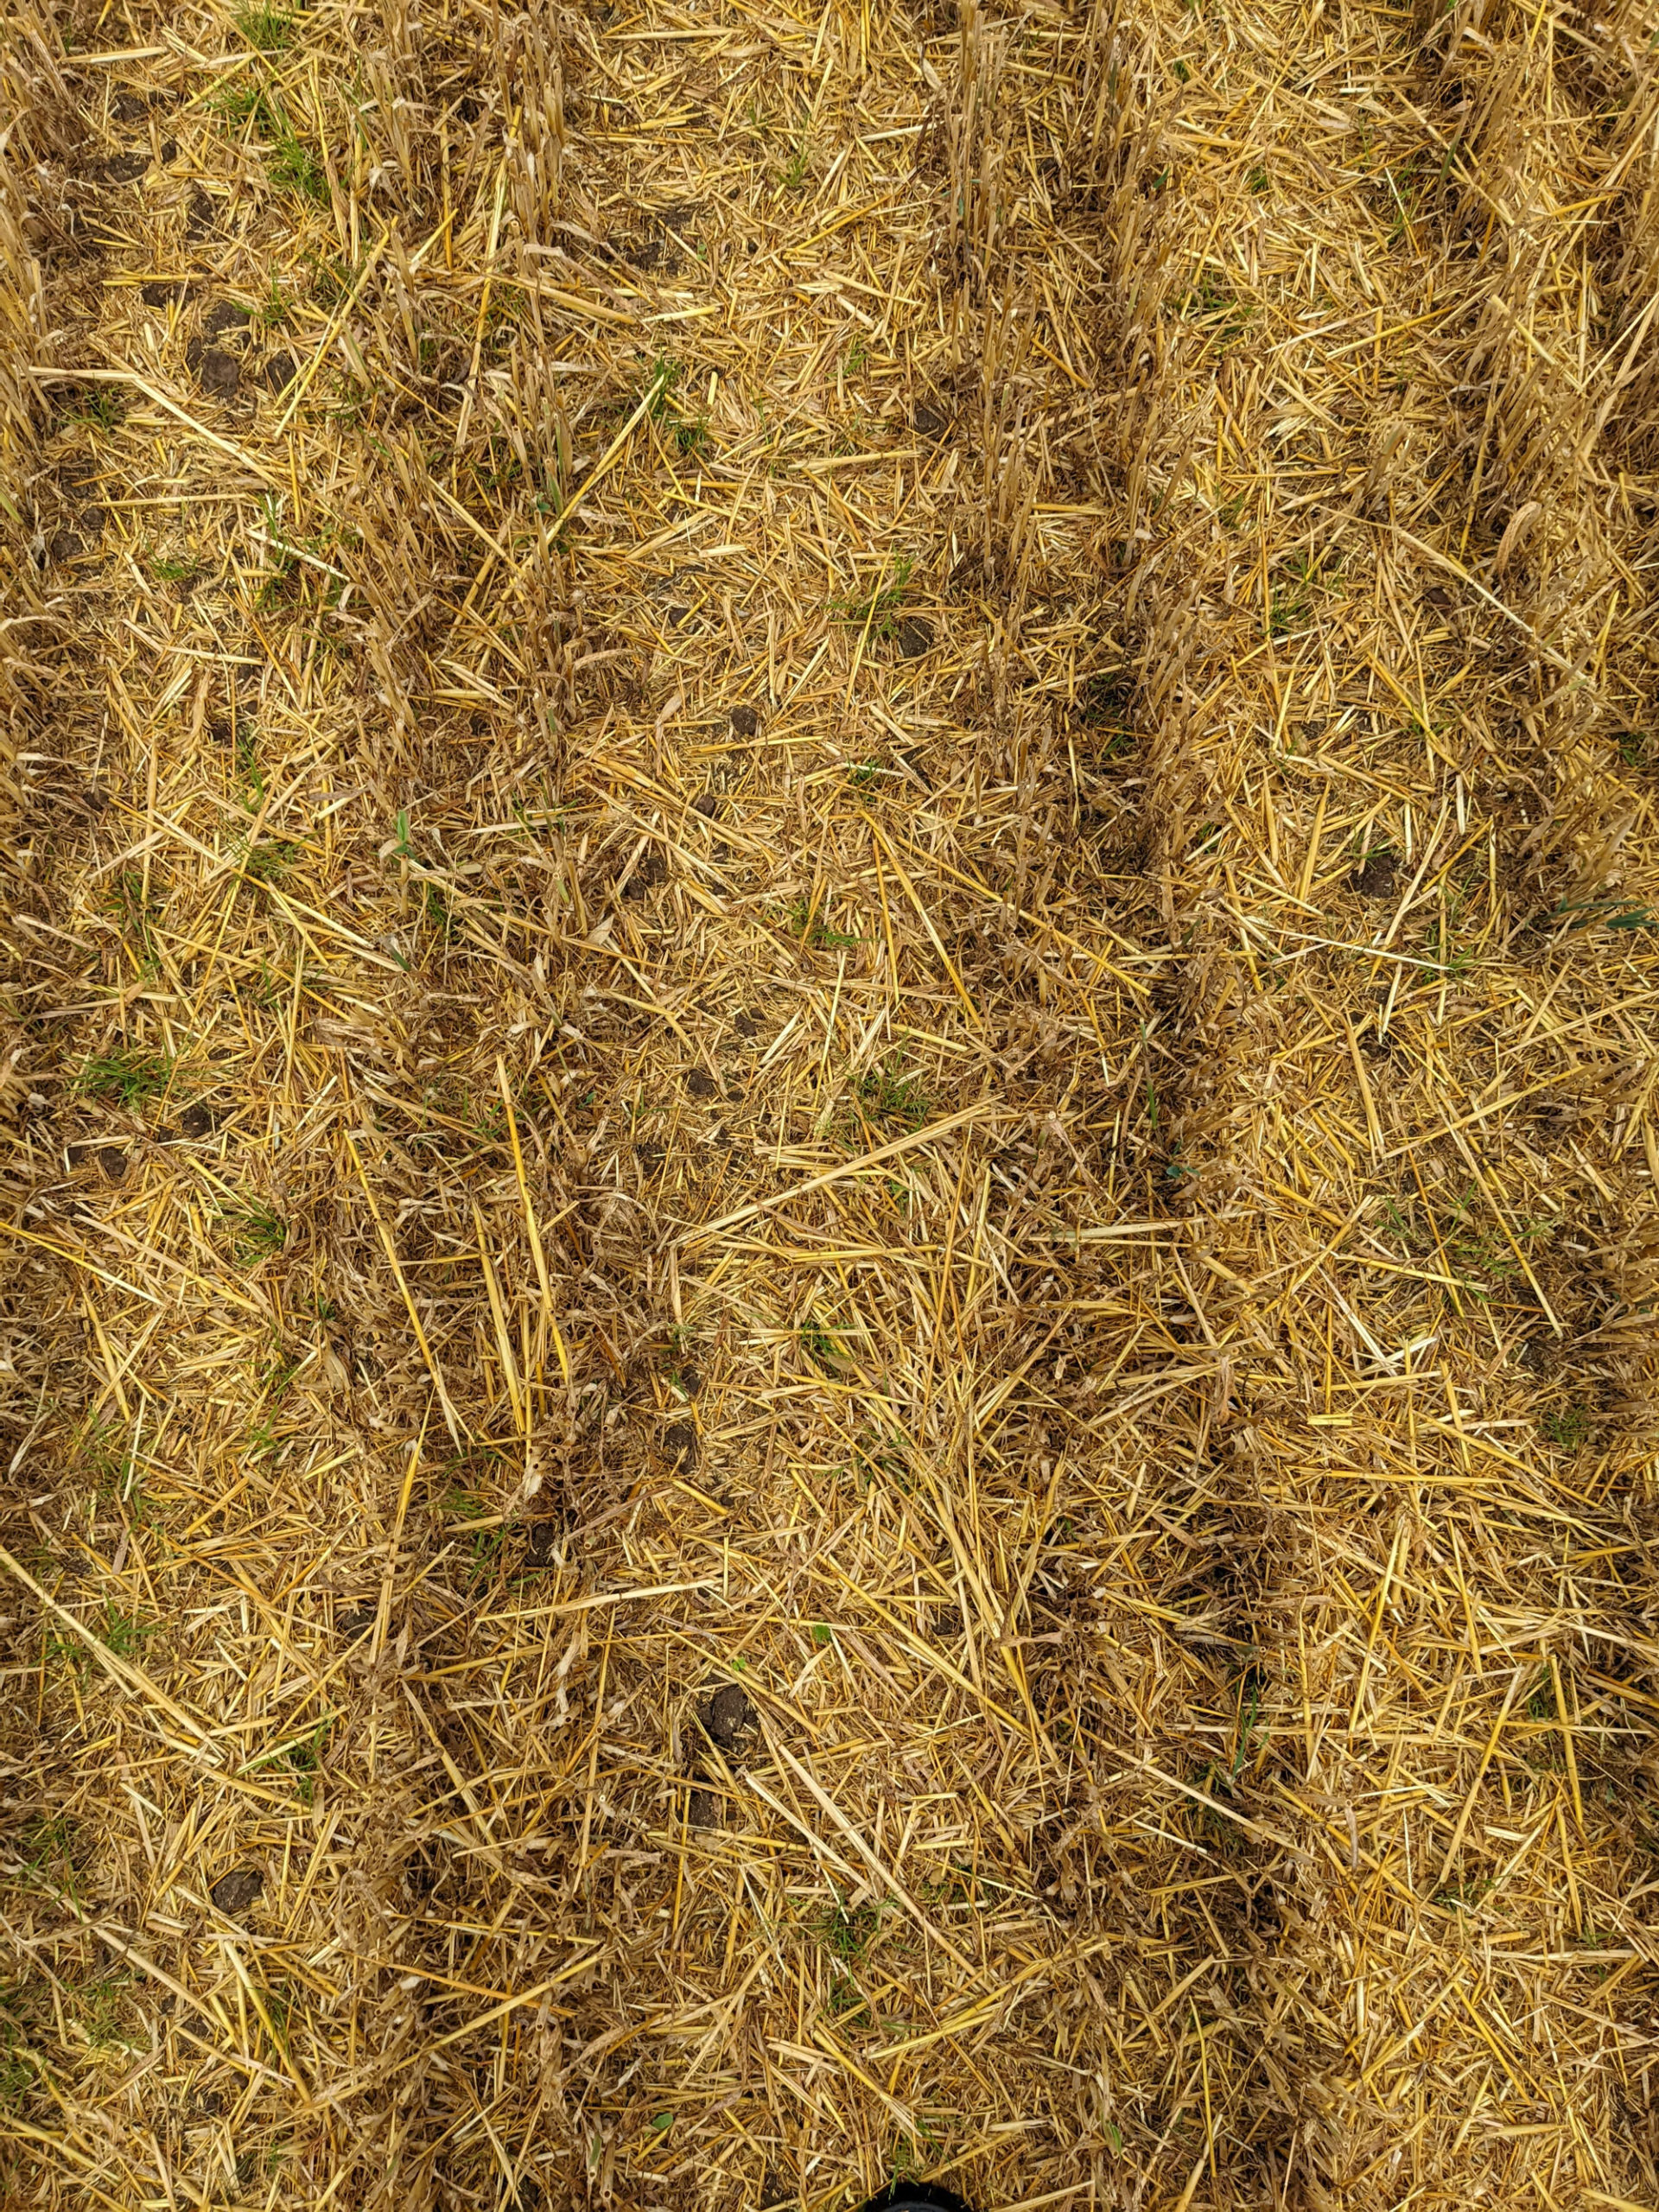 Oat stubble with 50 cm double row with full-width spraying (variant D) on 28th August 2022